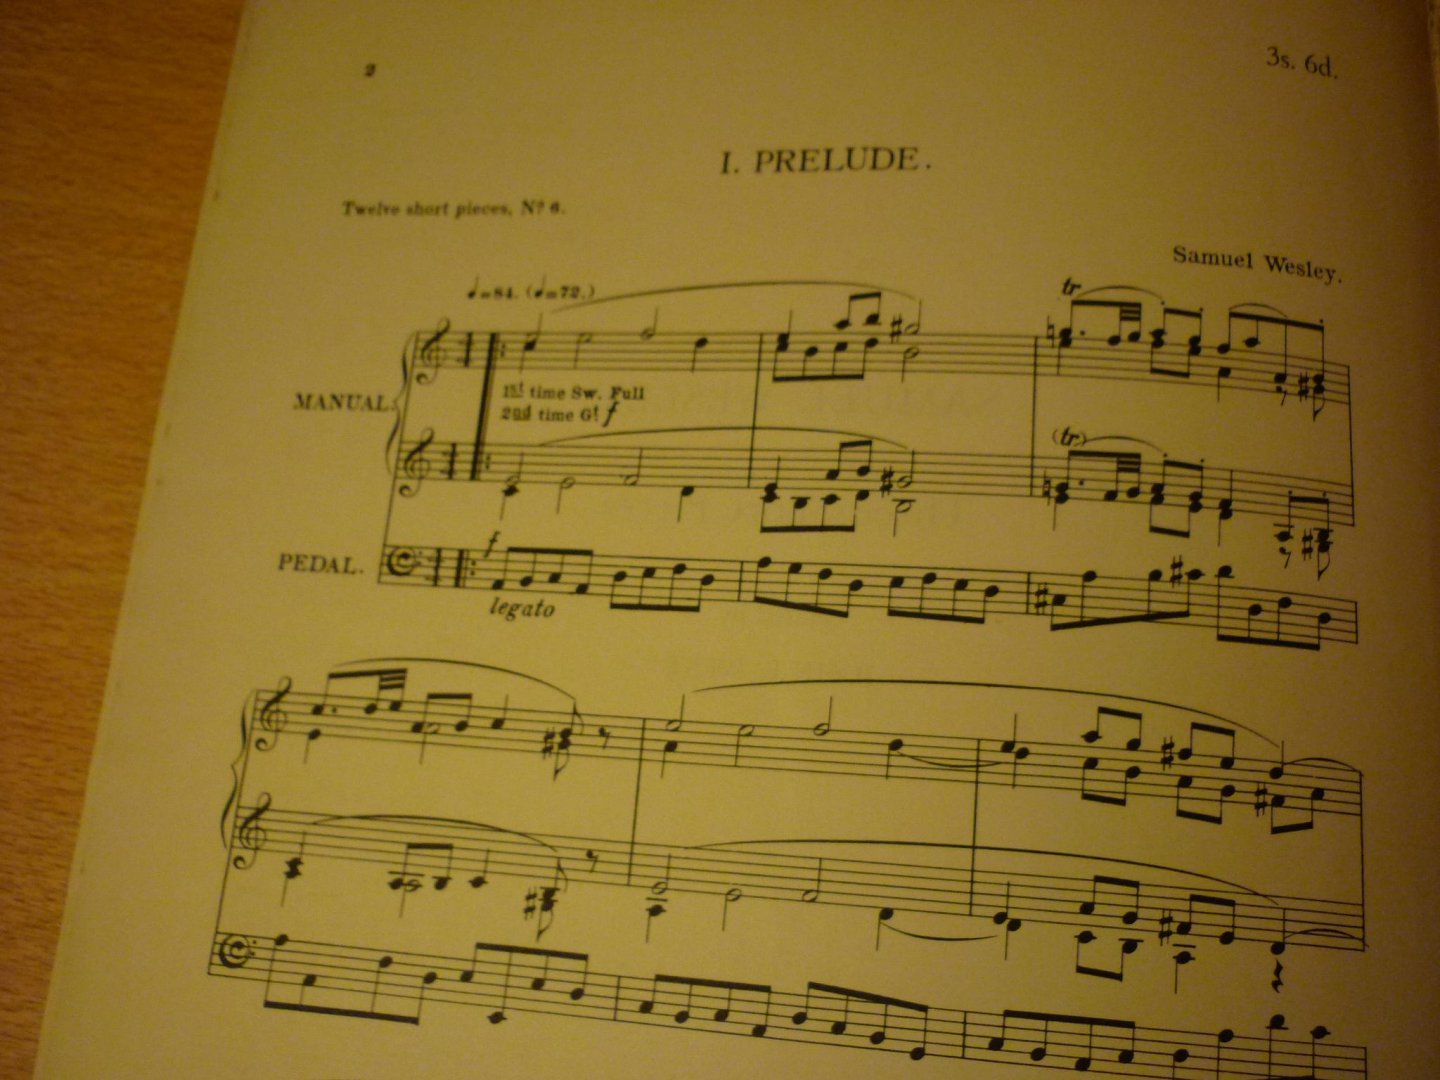 Wesley; Samuel - Three Short Pieces for Organ; Edited by John E. West